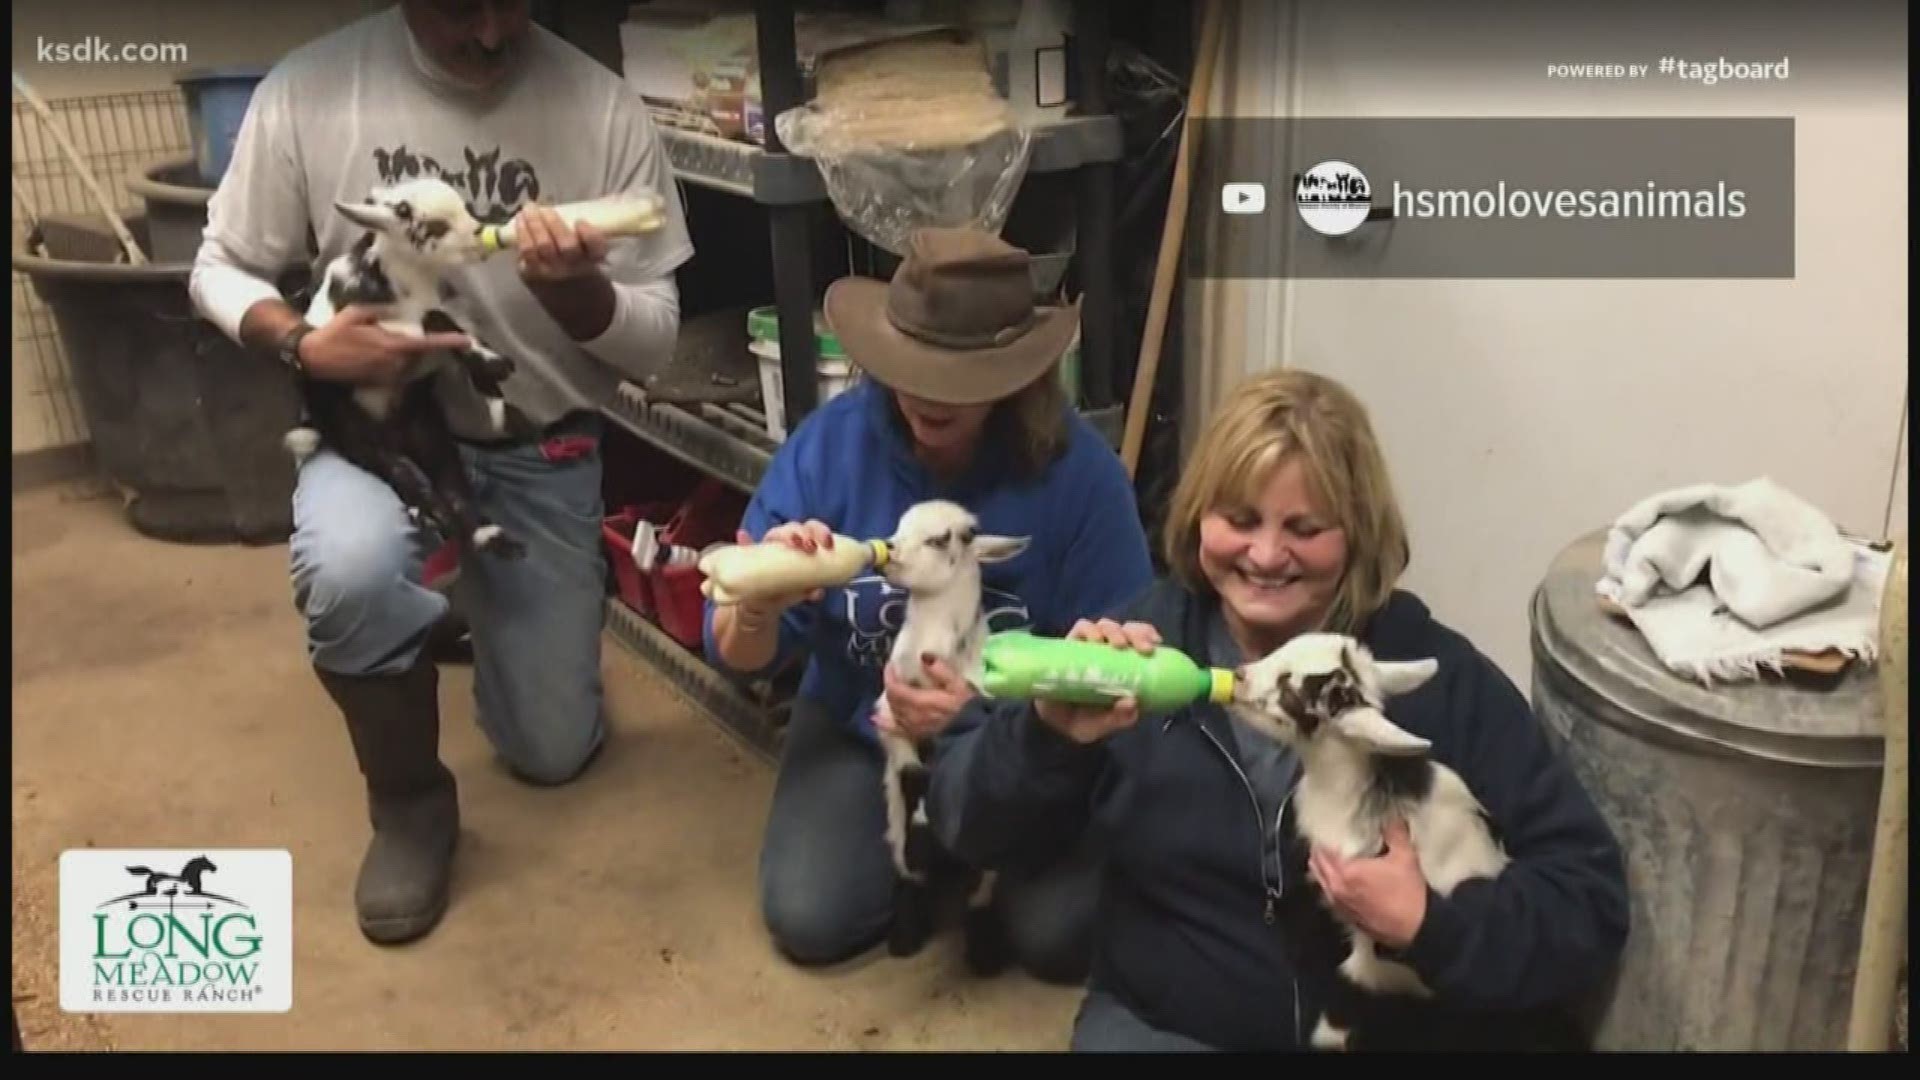 There are 12 baby goats that still need forever homes